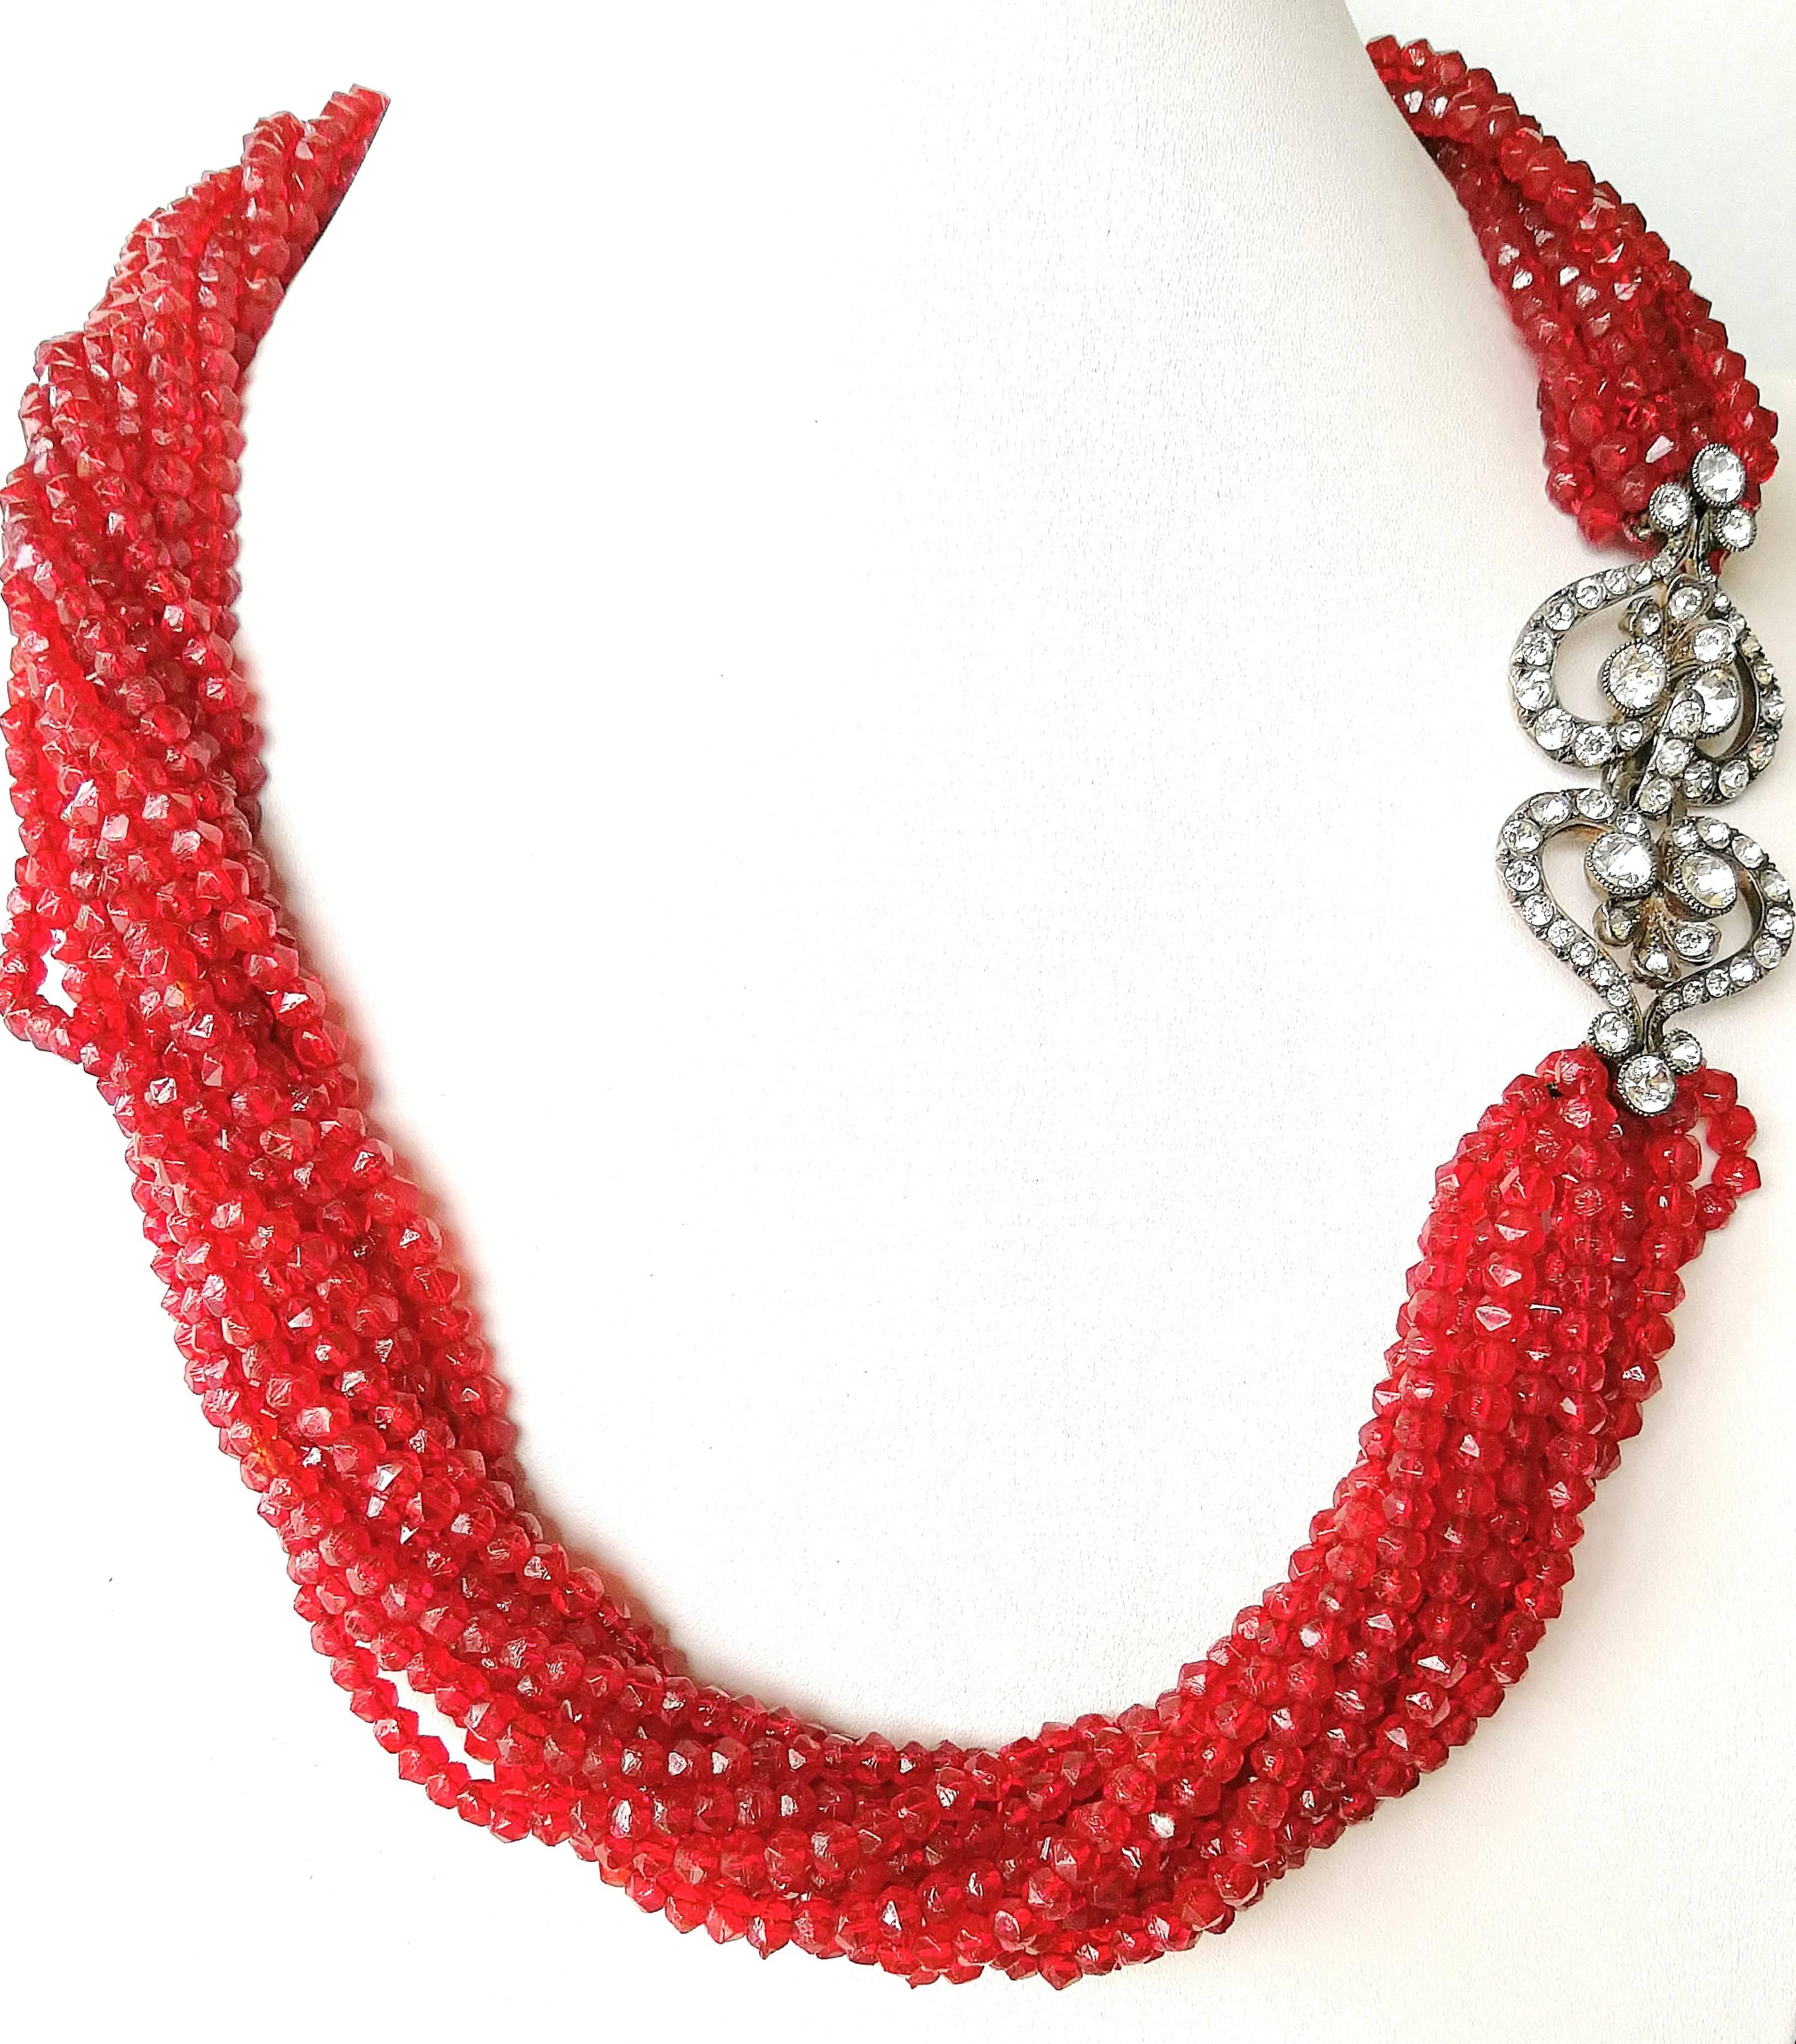 Vintage necklace 3 rows of red glass beads with cabochon clar